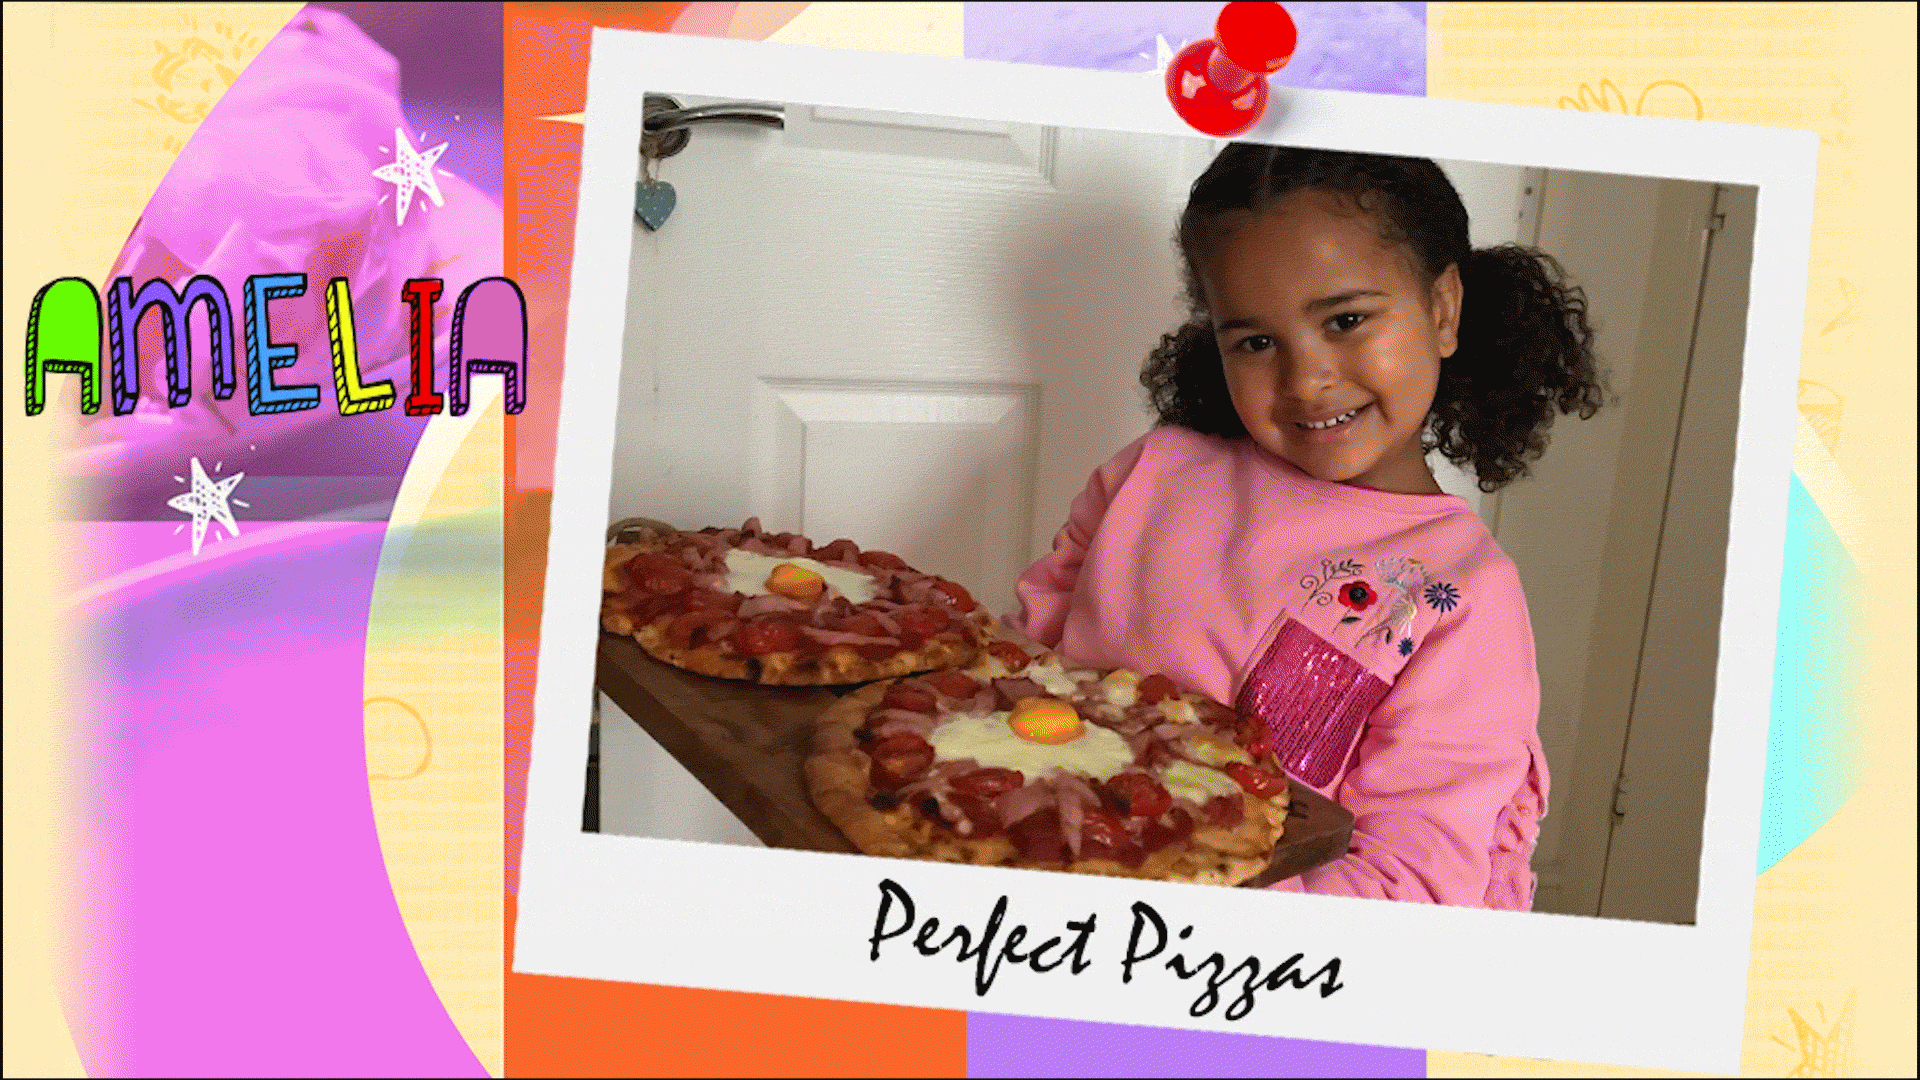 A little girl (Amelia) can be seen holding two tomato and meat pizzas, decorated with a fried egg, then a pan full of chocolatey churros.